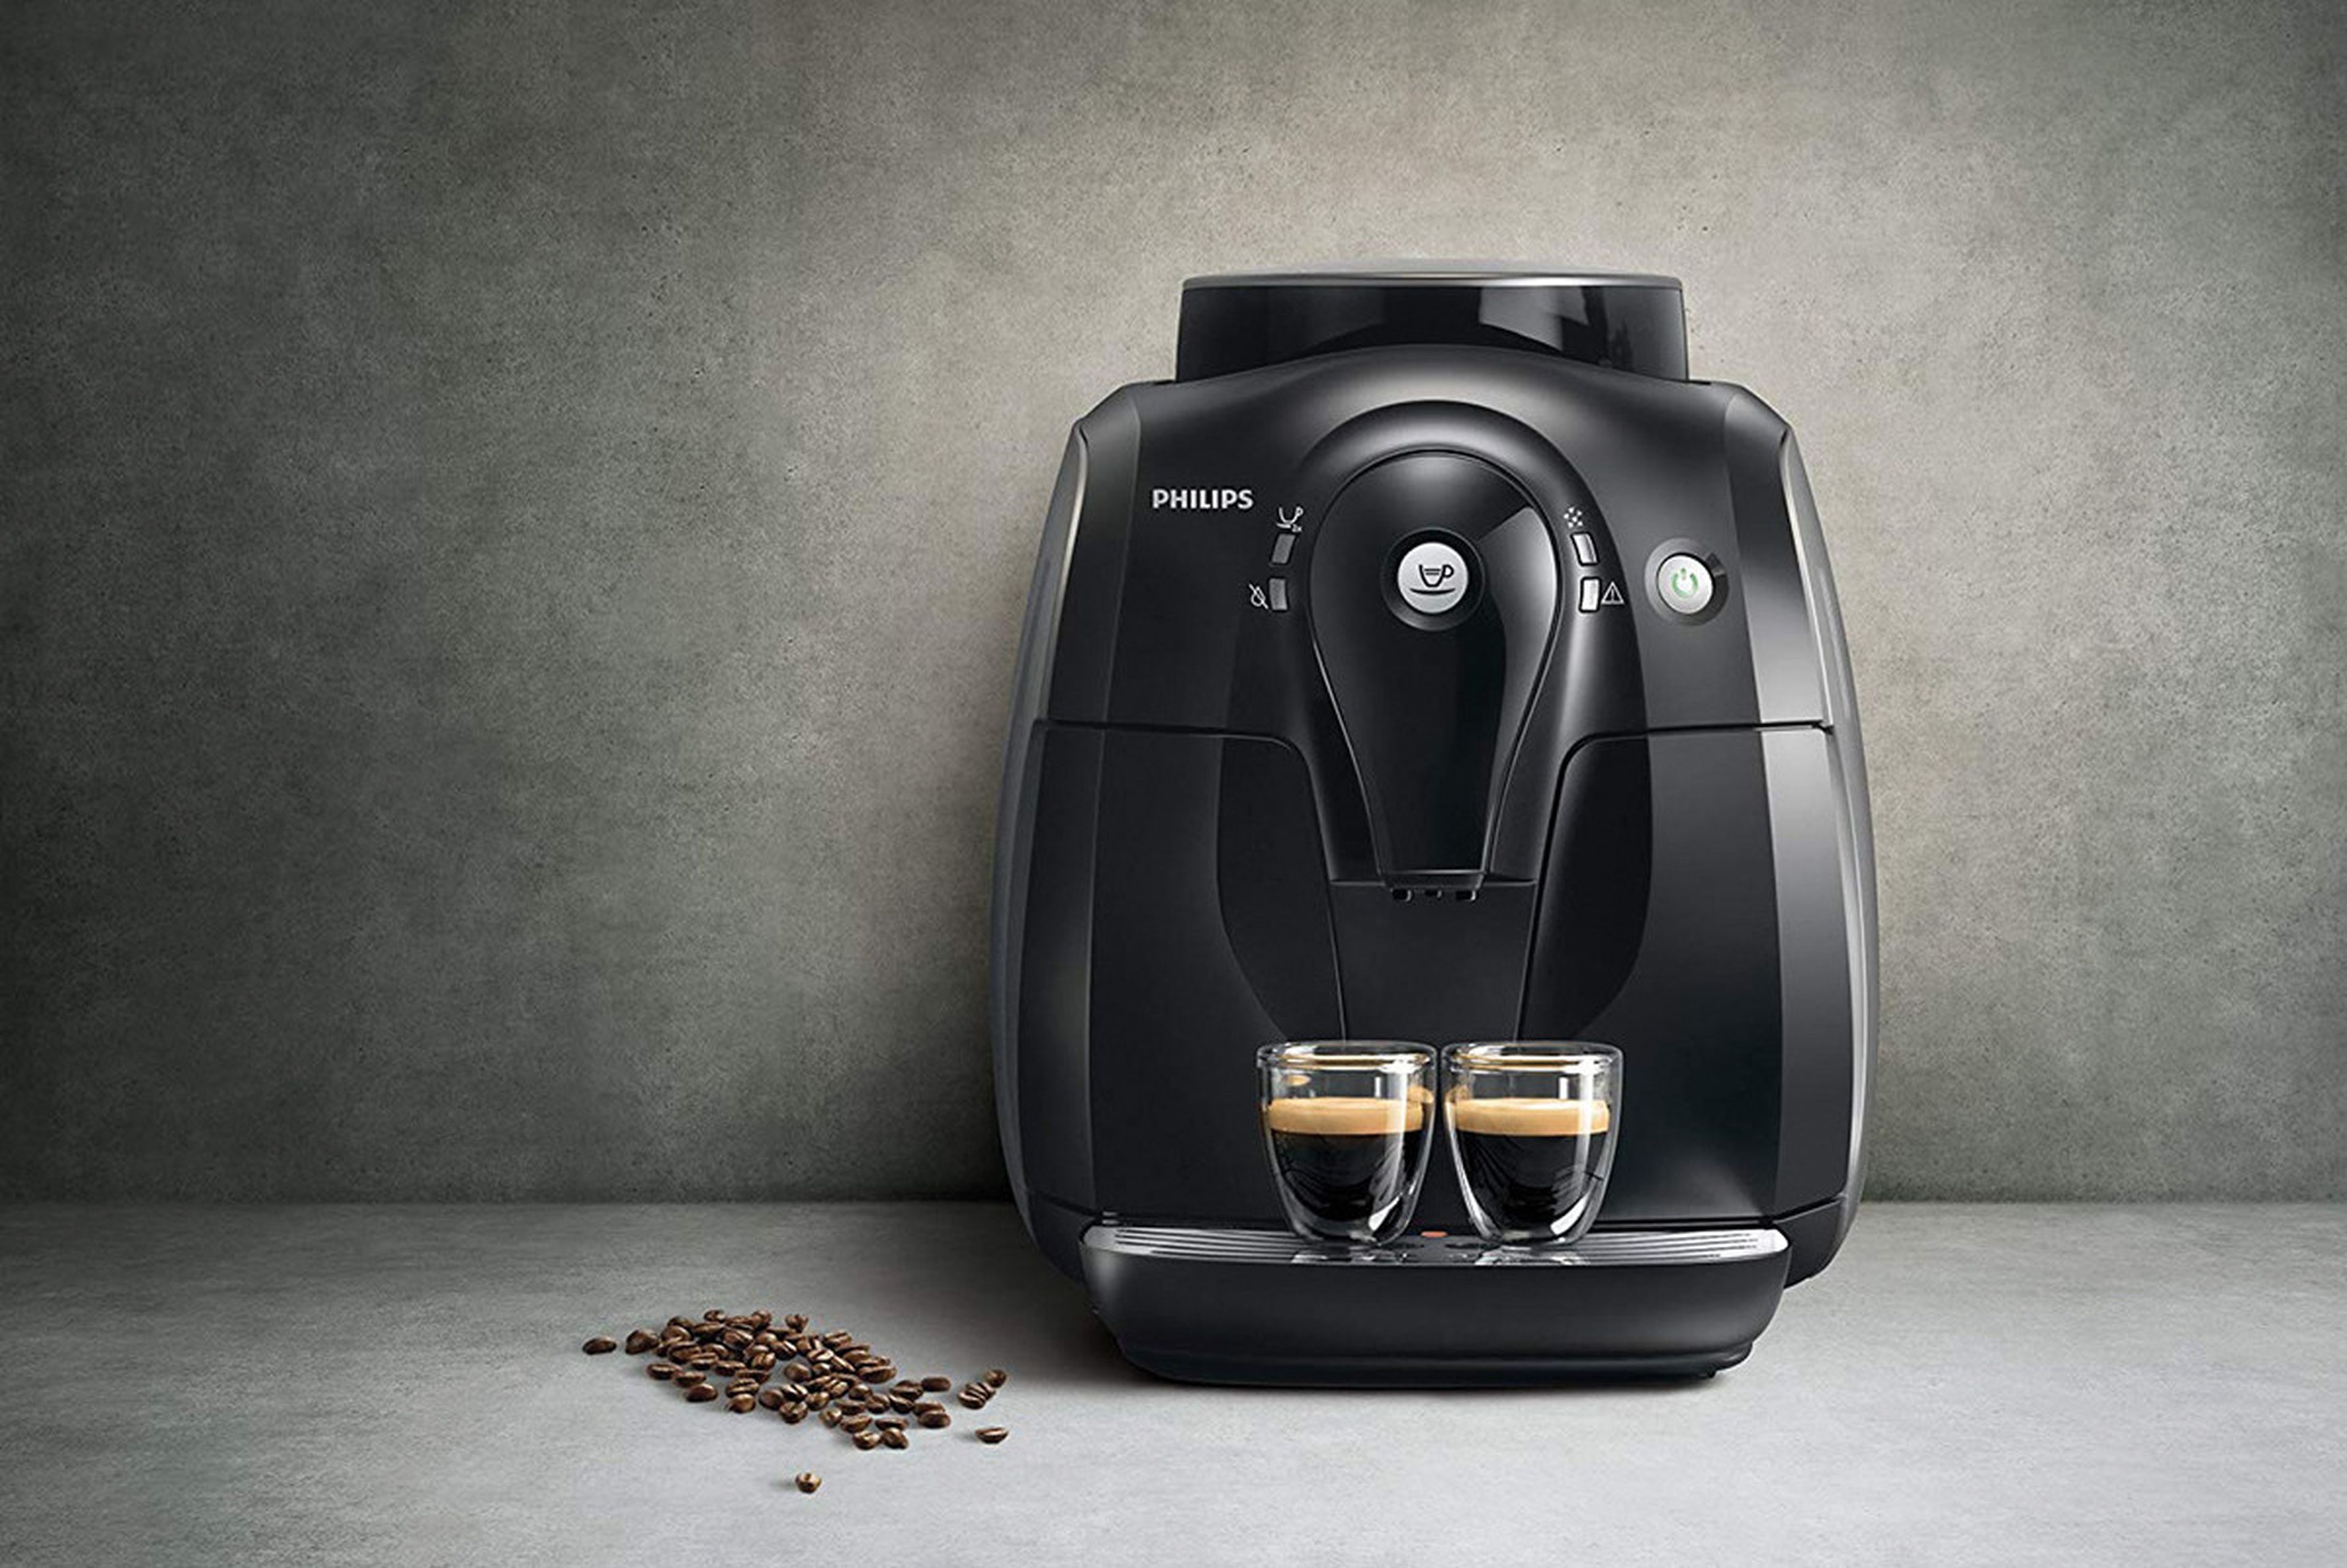 Cafetera philips